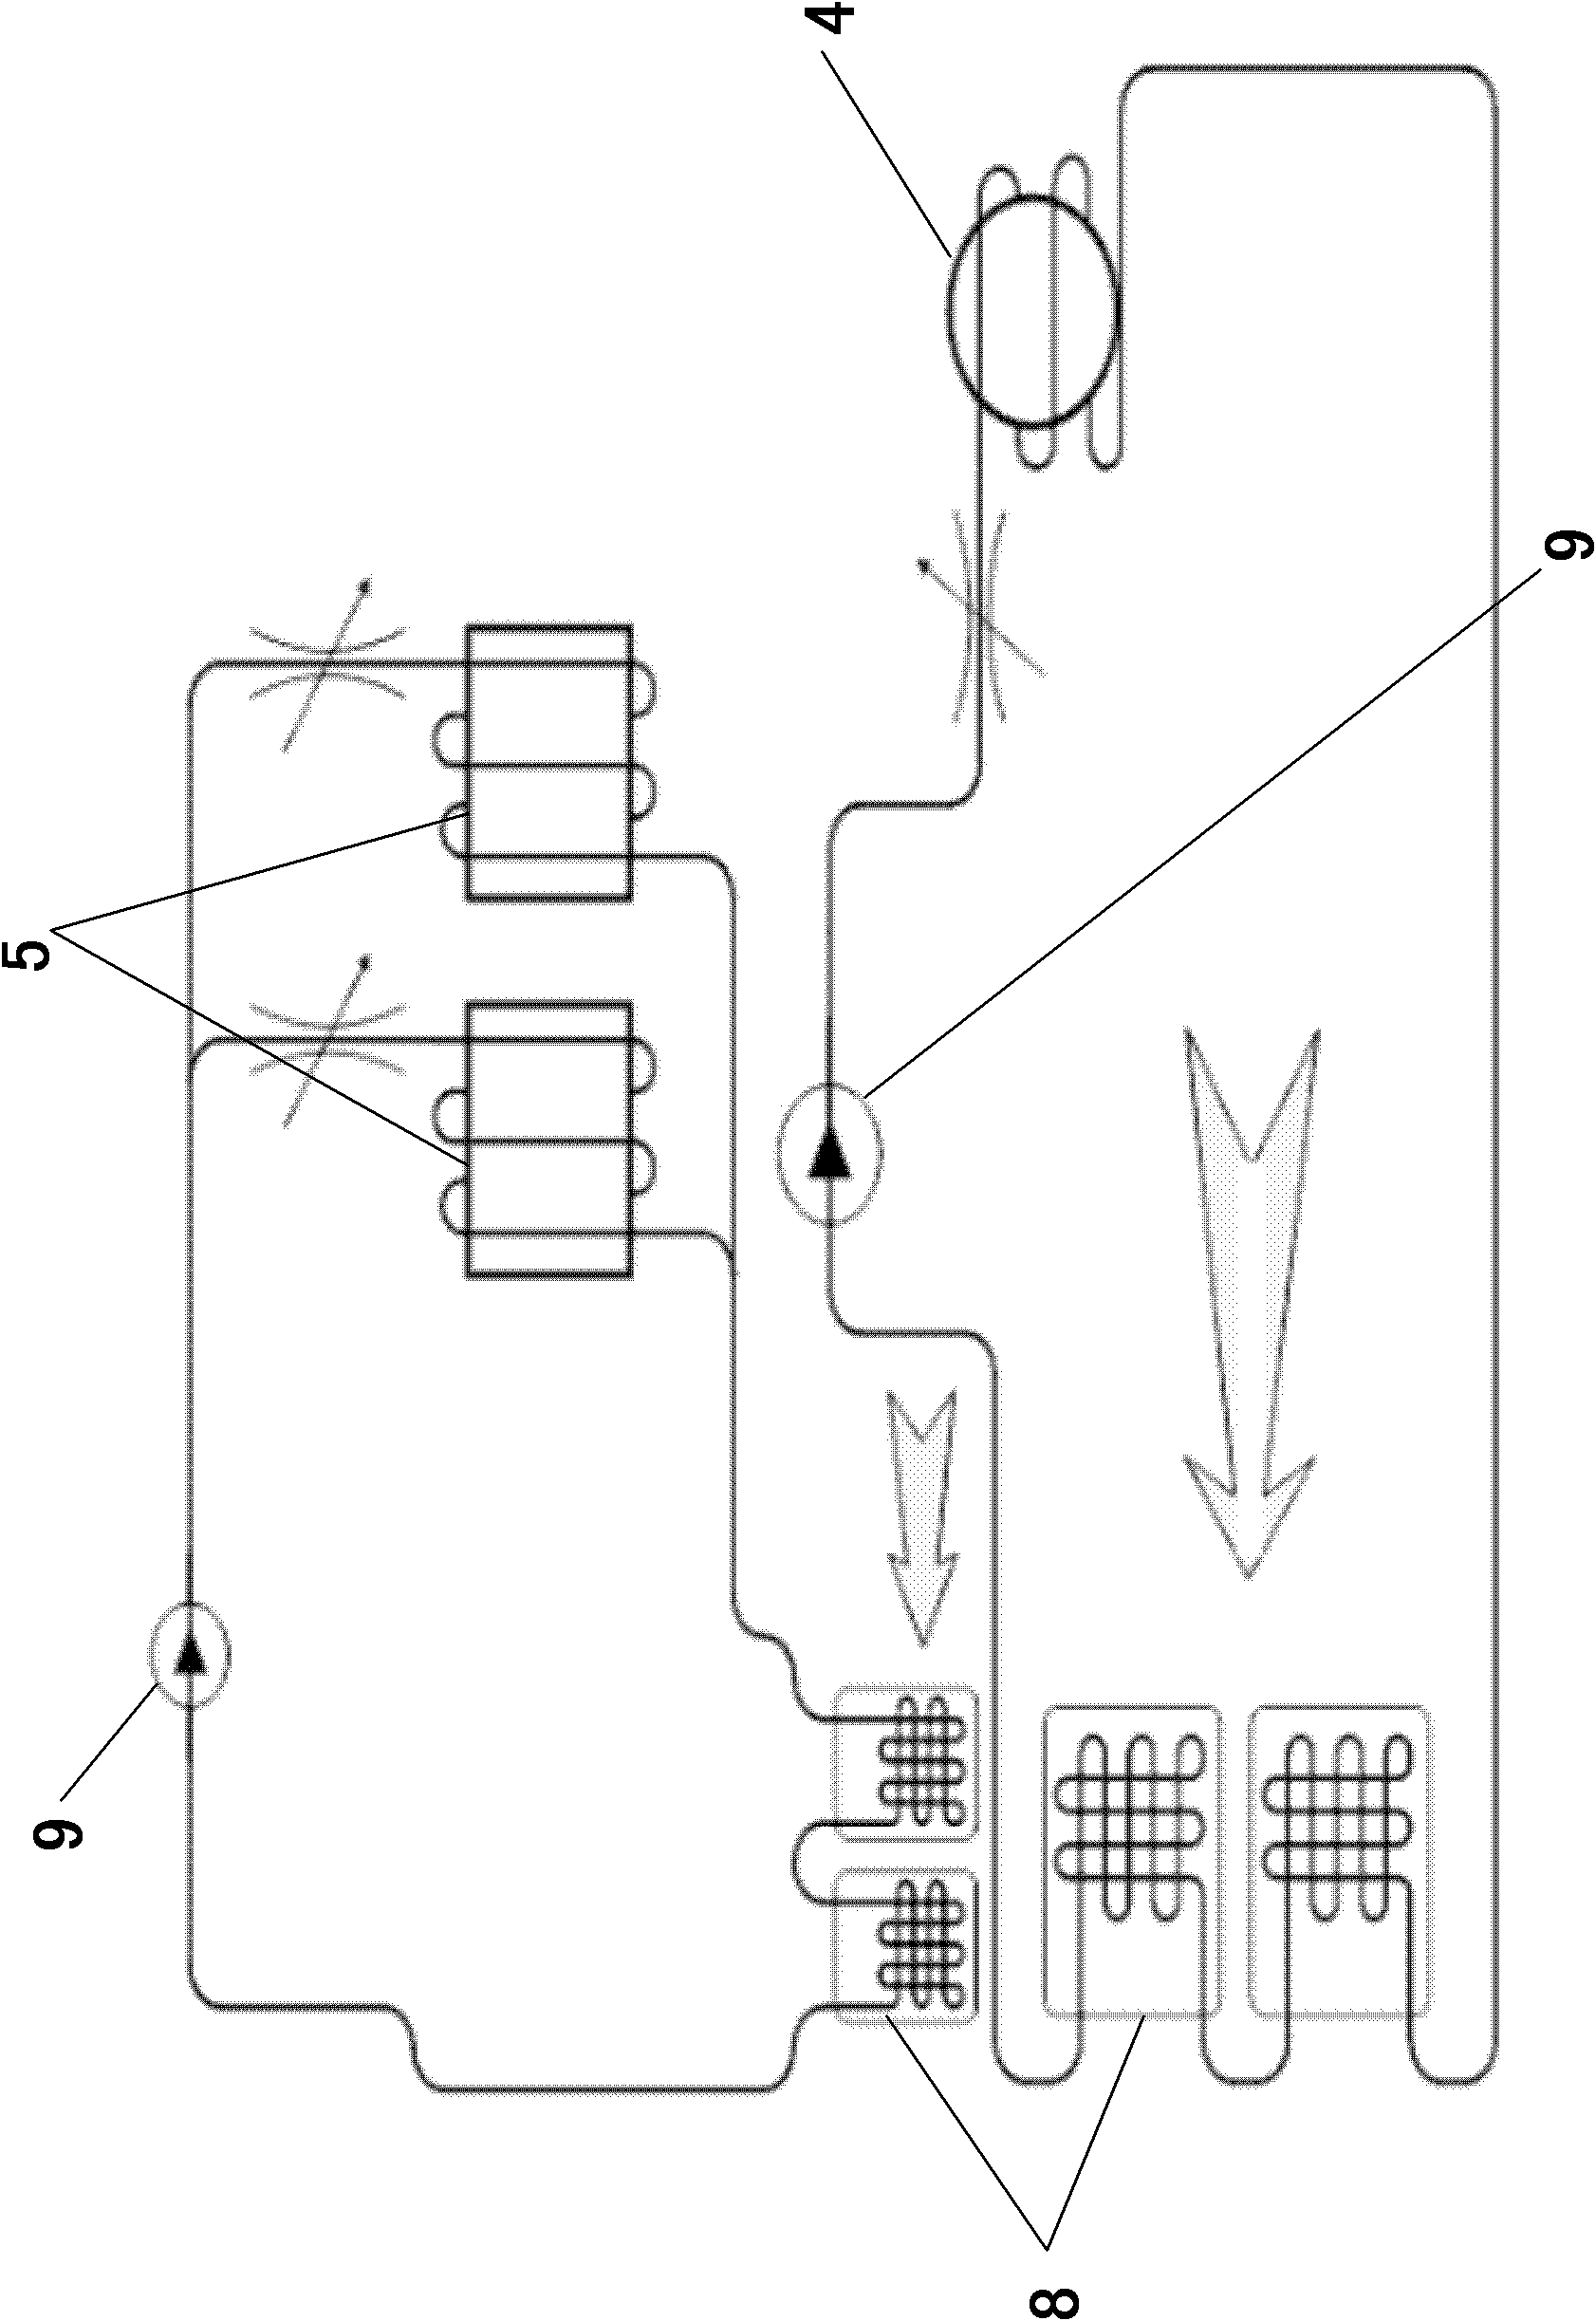 Uniaxially coupled double-wind driven generator